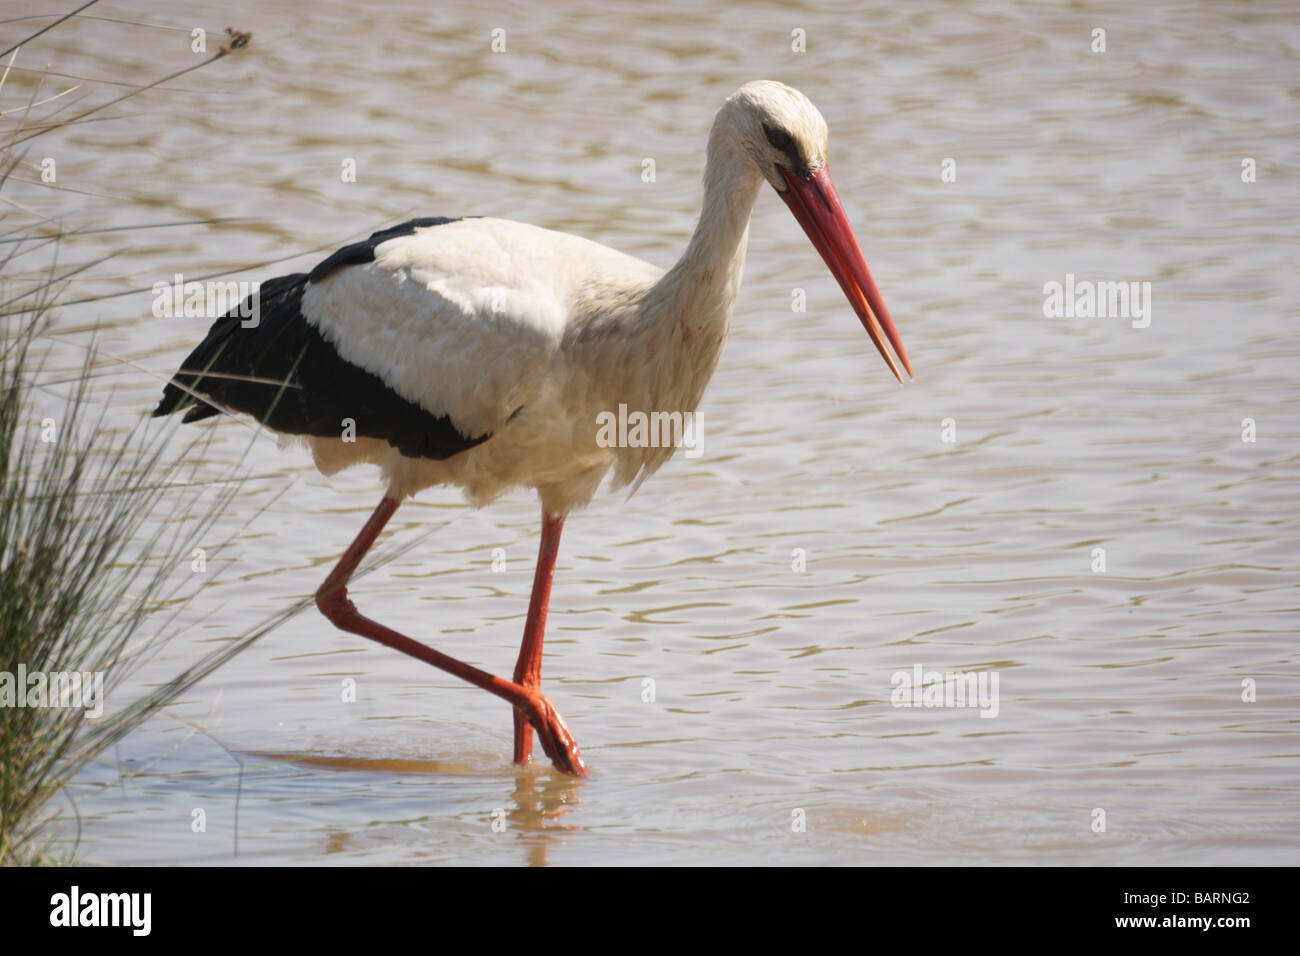 Birds;Storks;White Stork;'Ciconia ciconia';Adult walking in water. Stock Photo